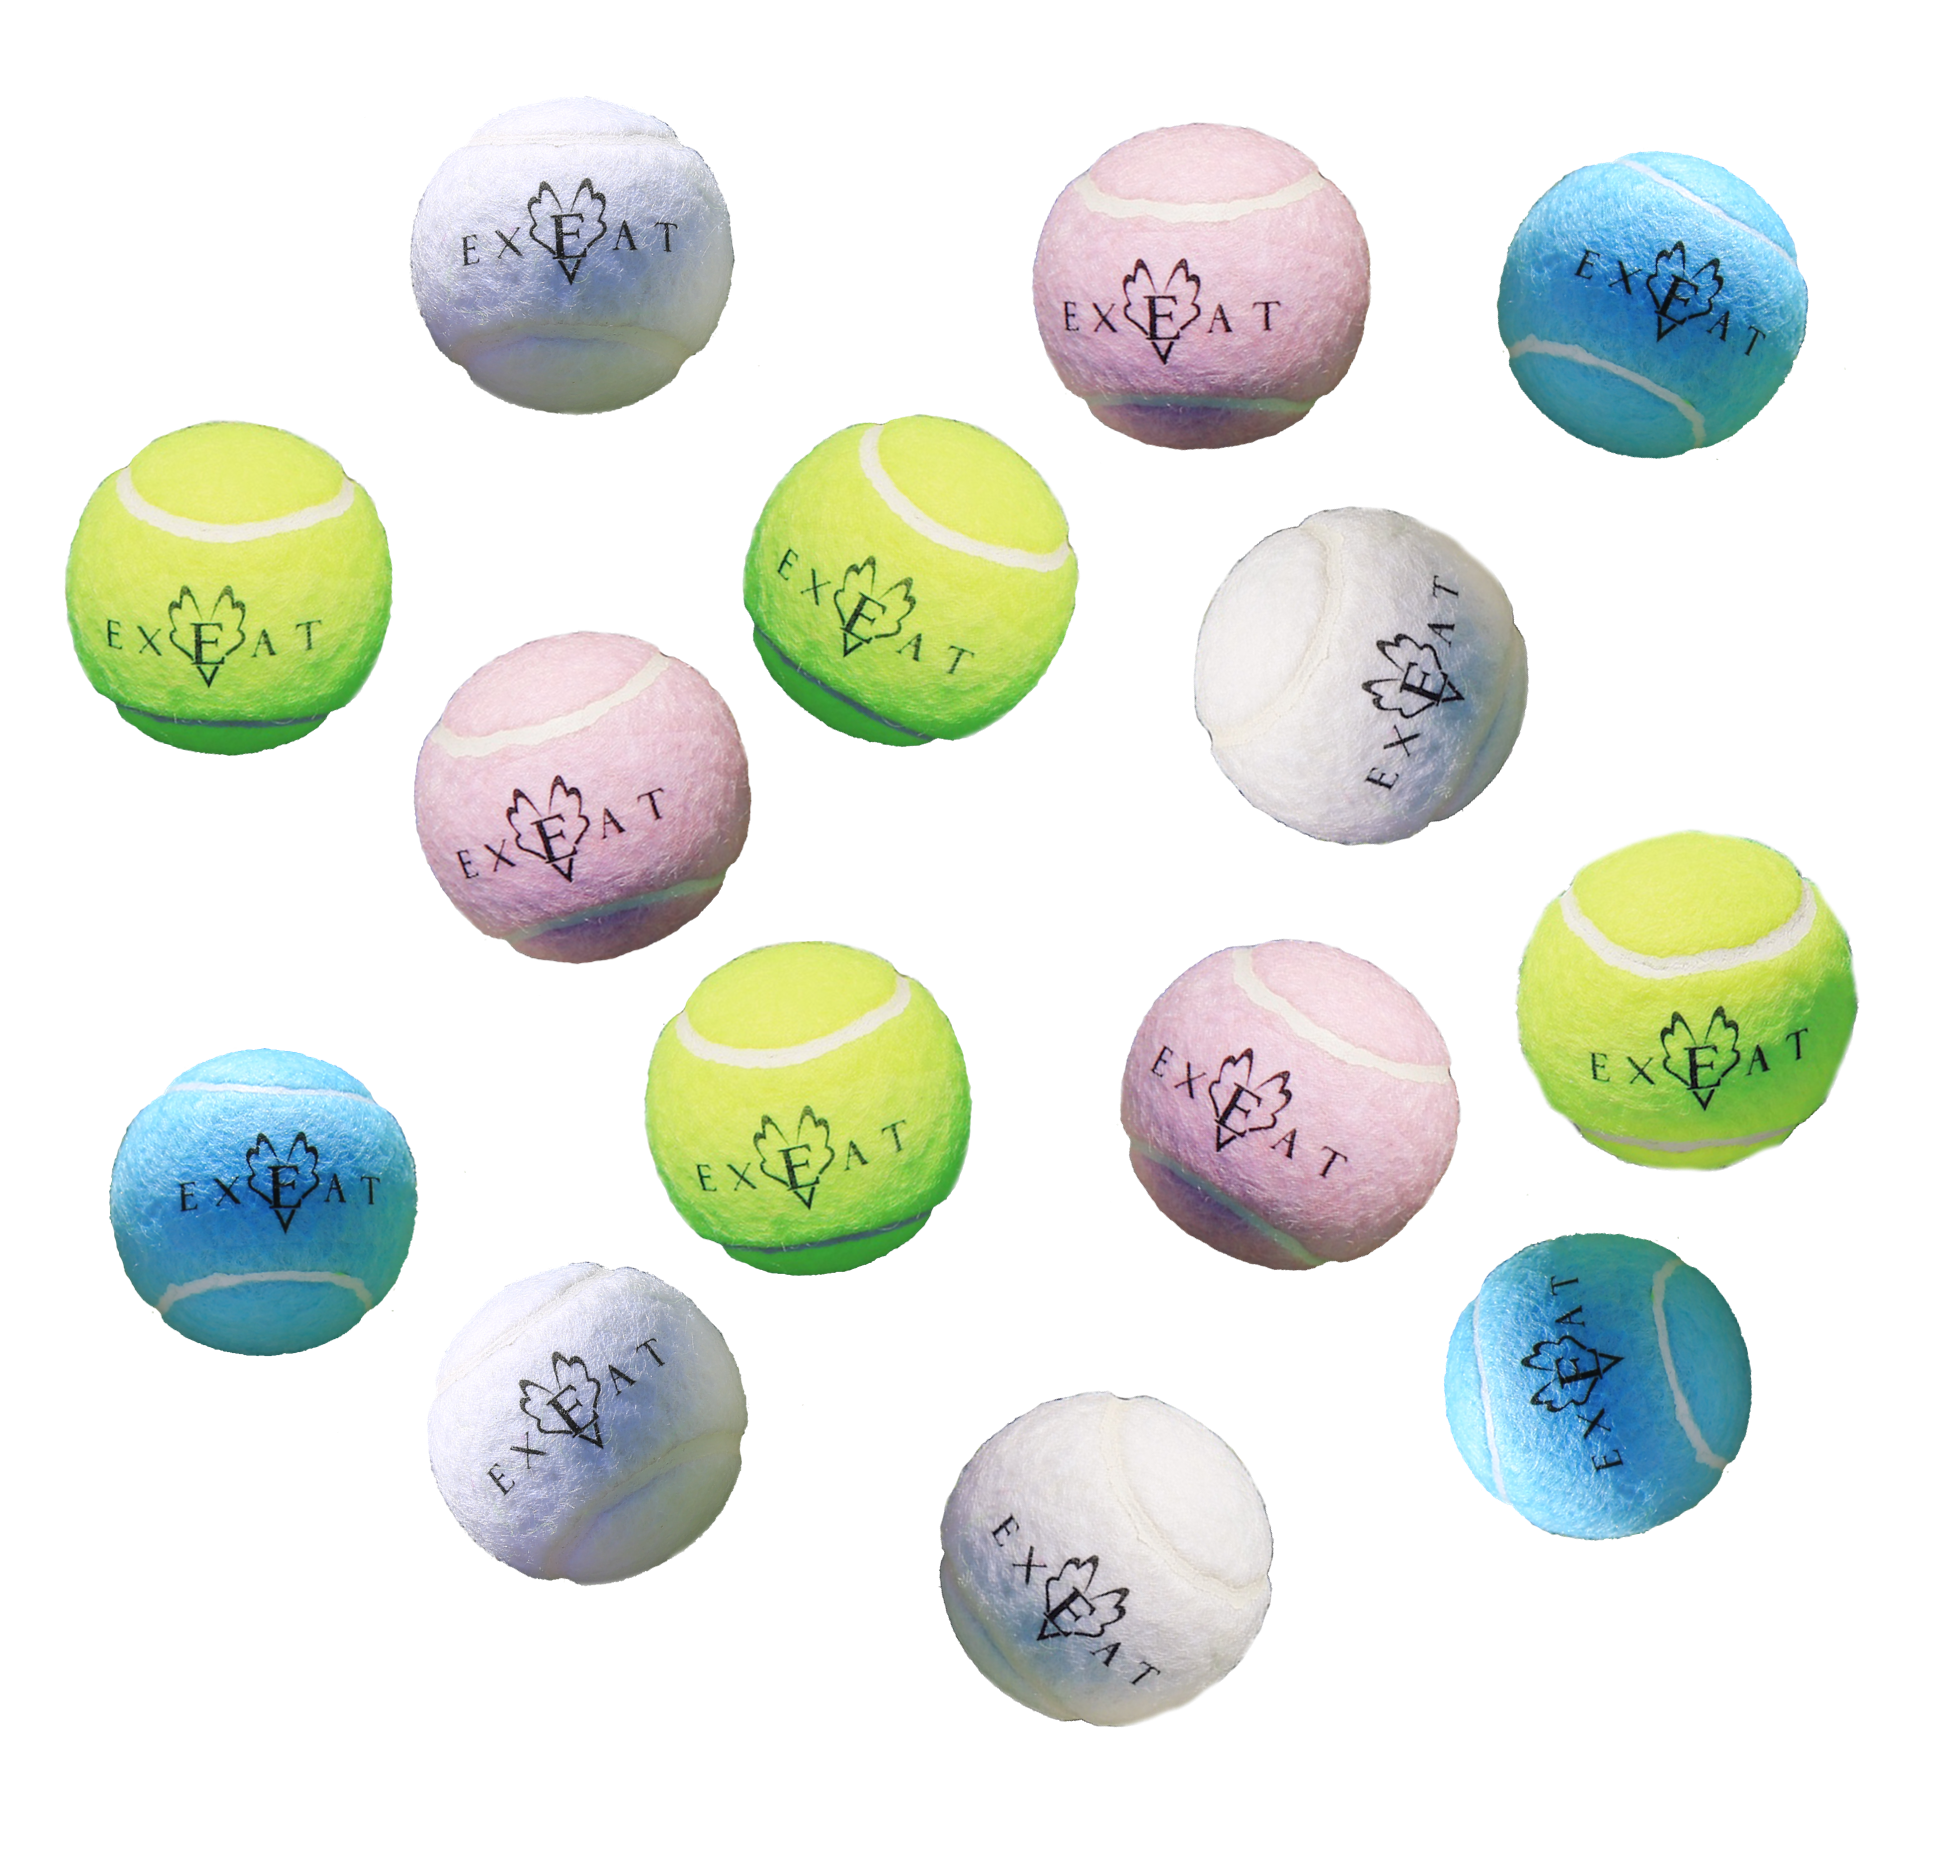 exeat-tennis-ball-collage.png